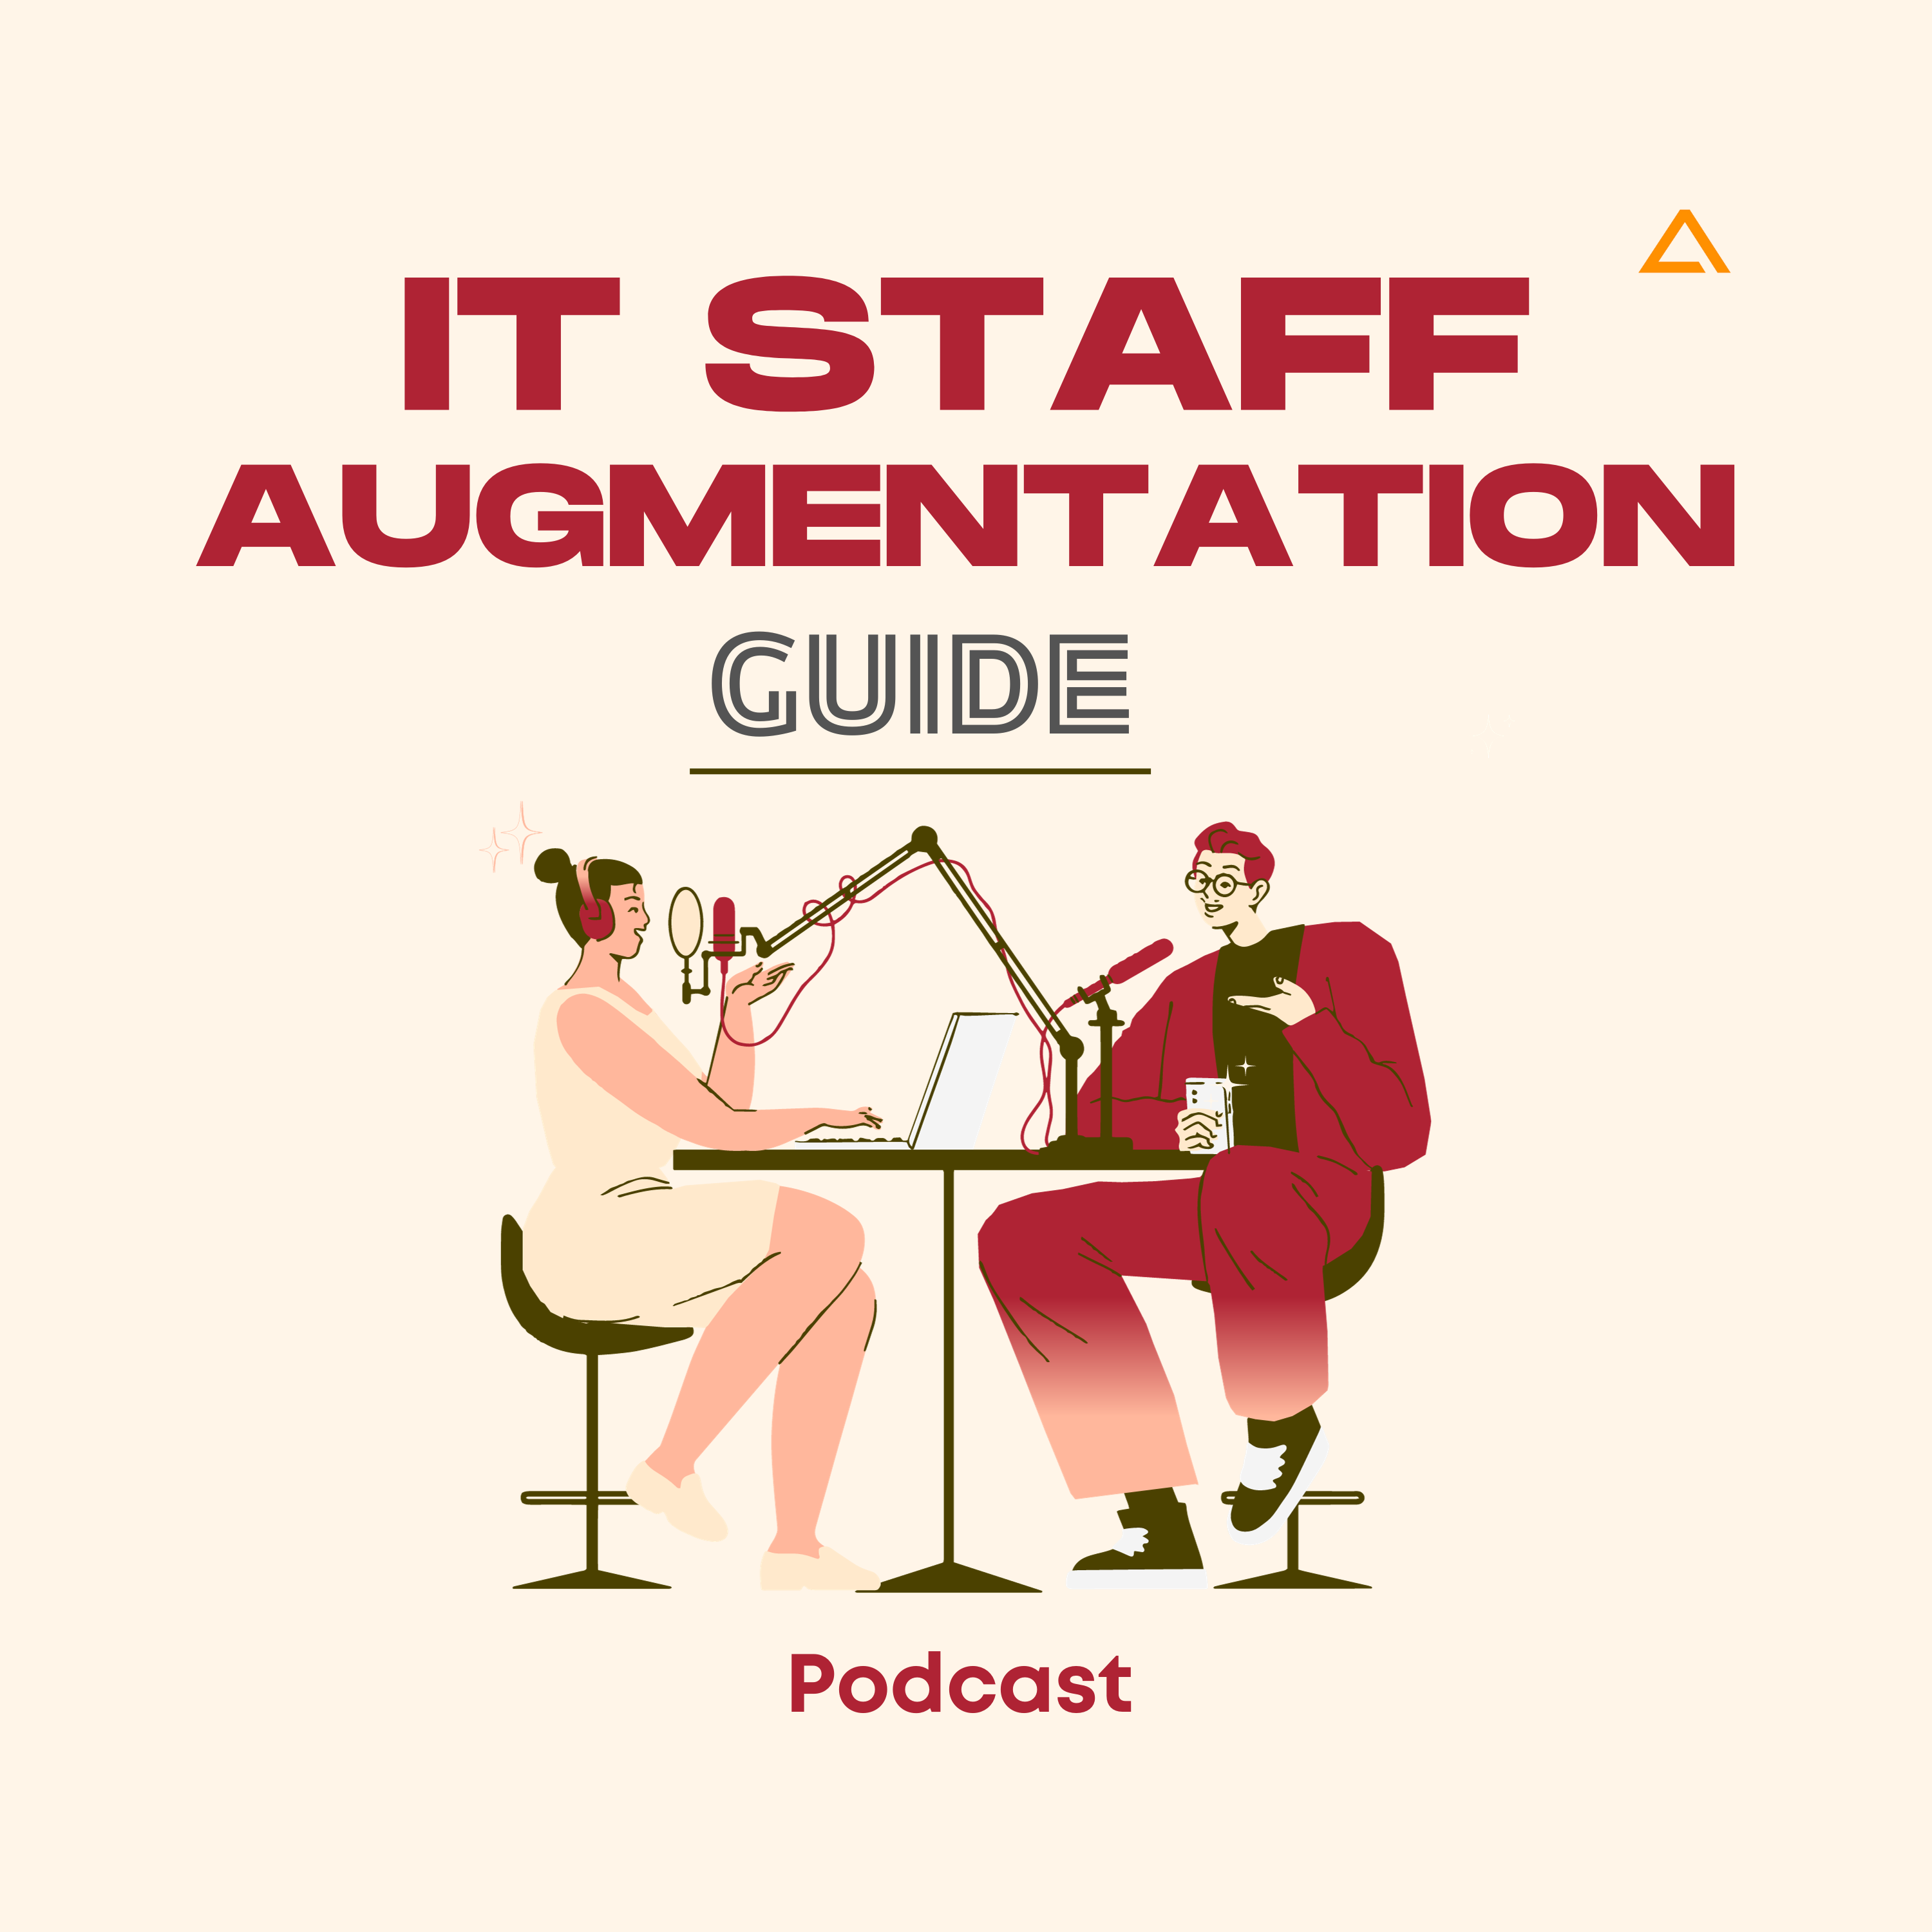 The IT Staff Augmentation Guide